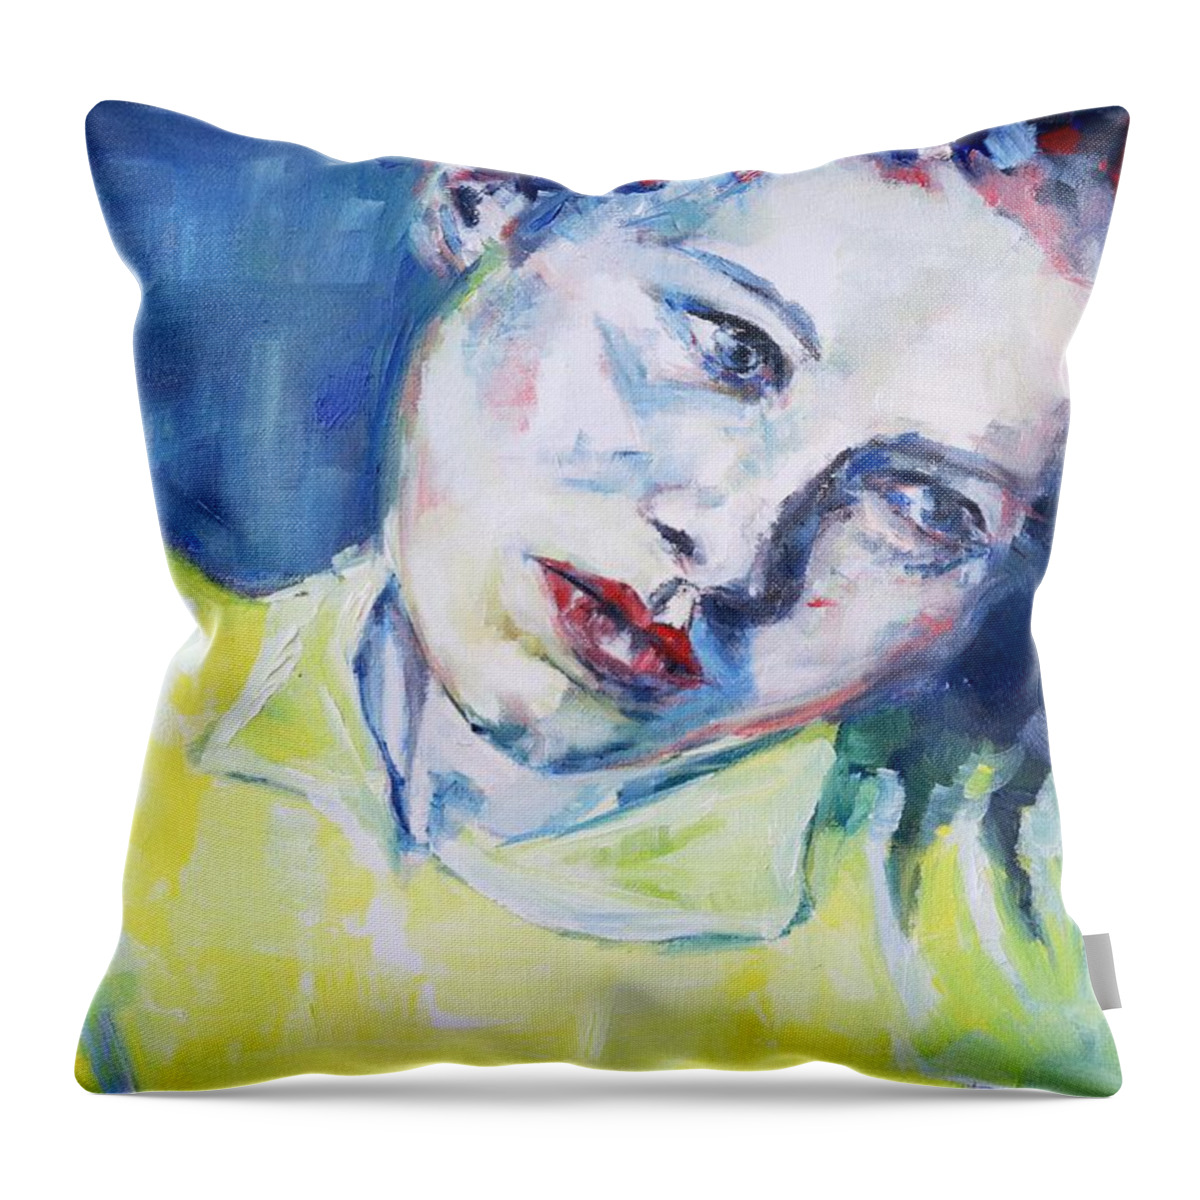 Portrait Throw Pillow featuring the painting Whenever I say Your Name by Christel Roelandt